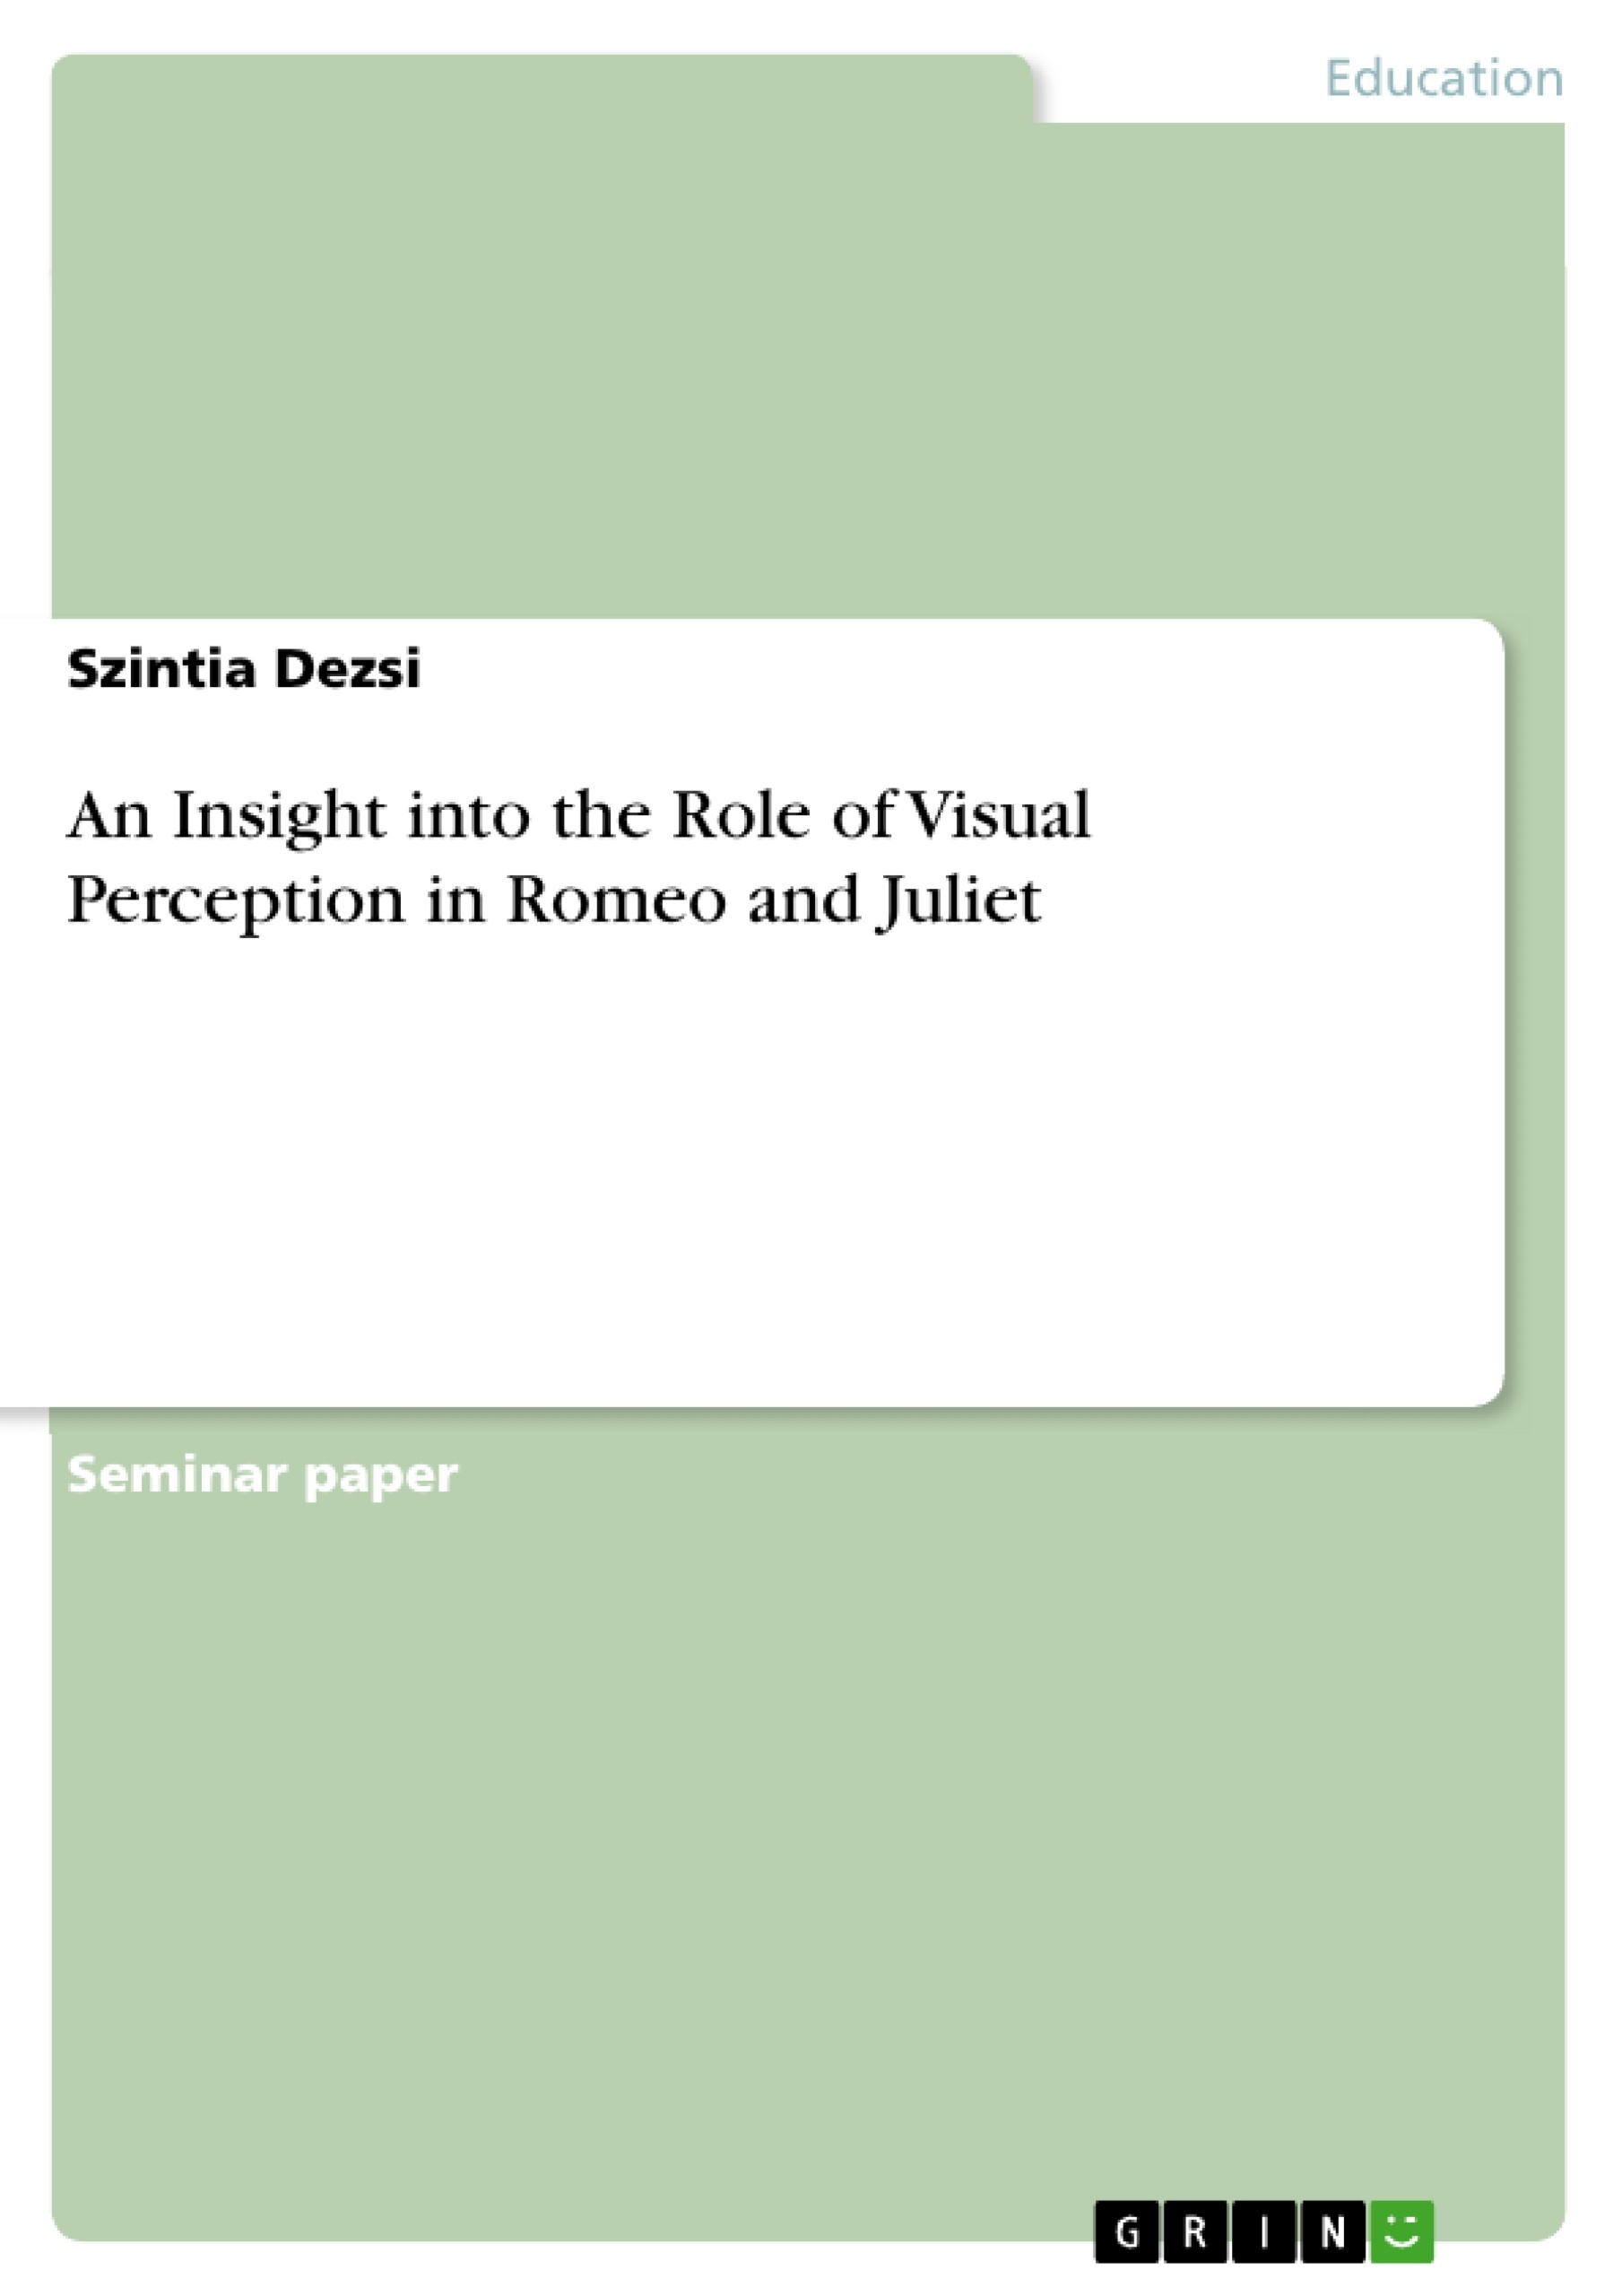 Title: An Insight into the Role of Visual Perception in Romeo and Juliet